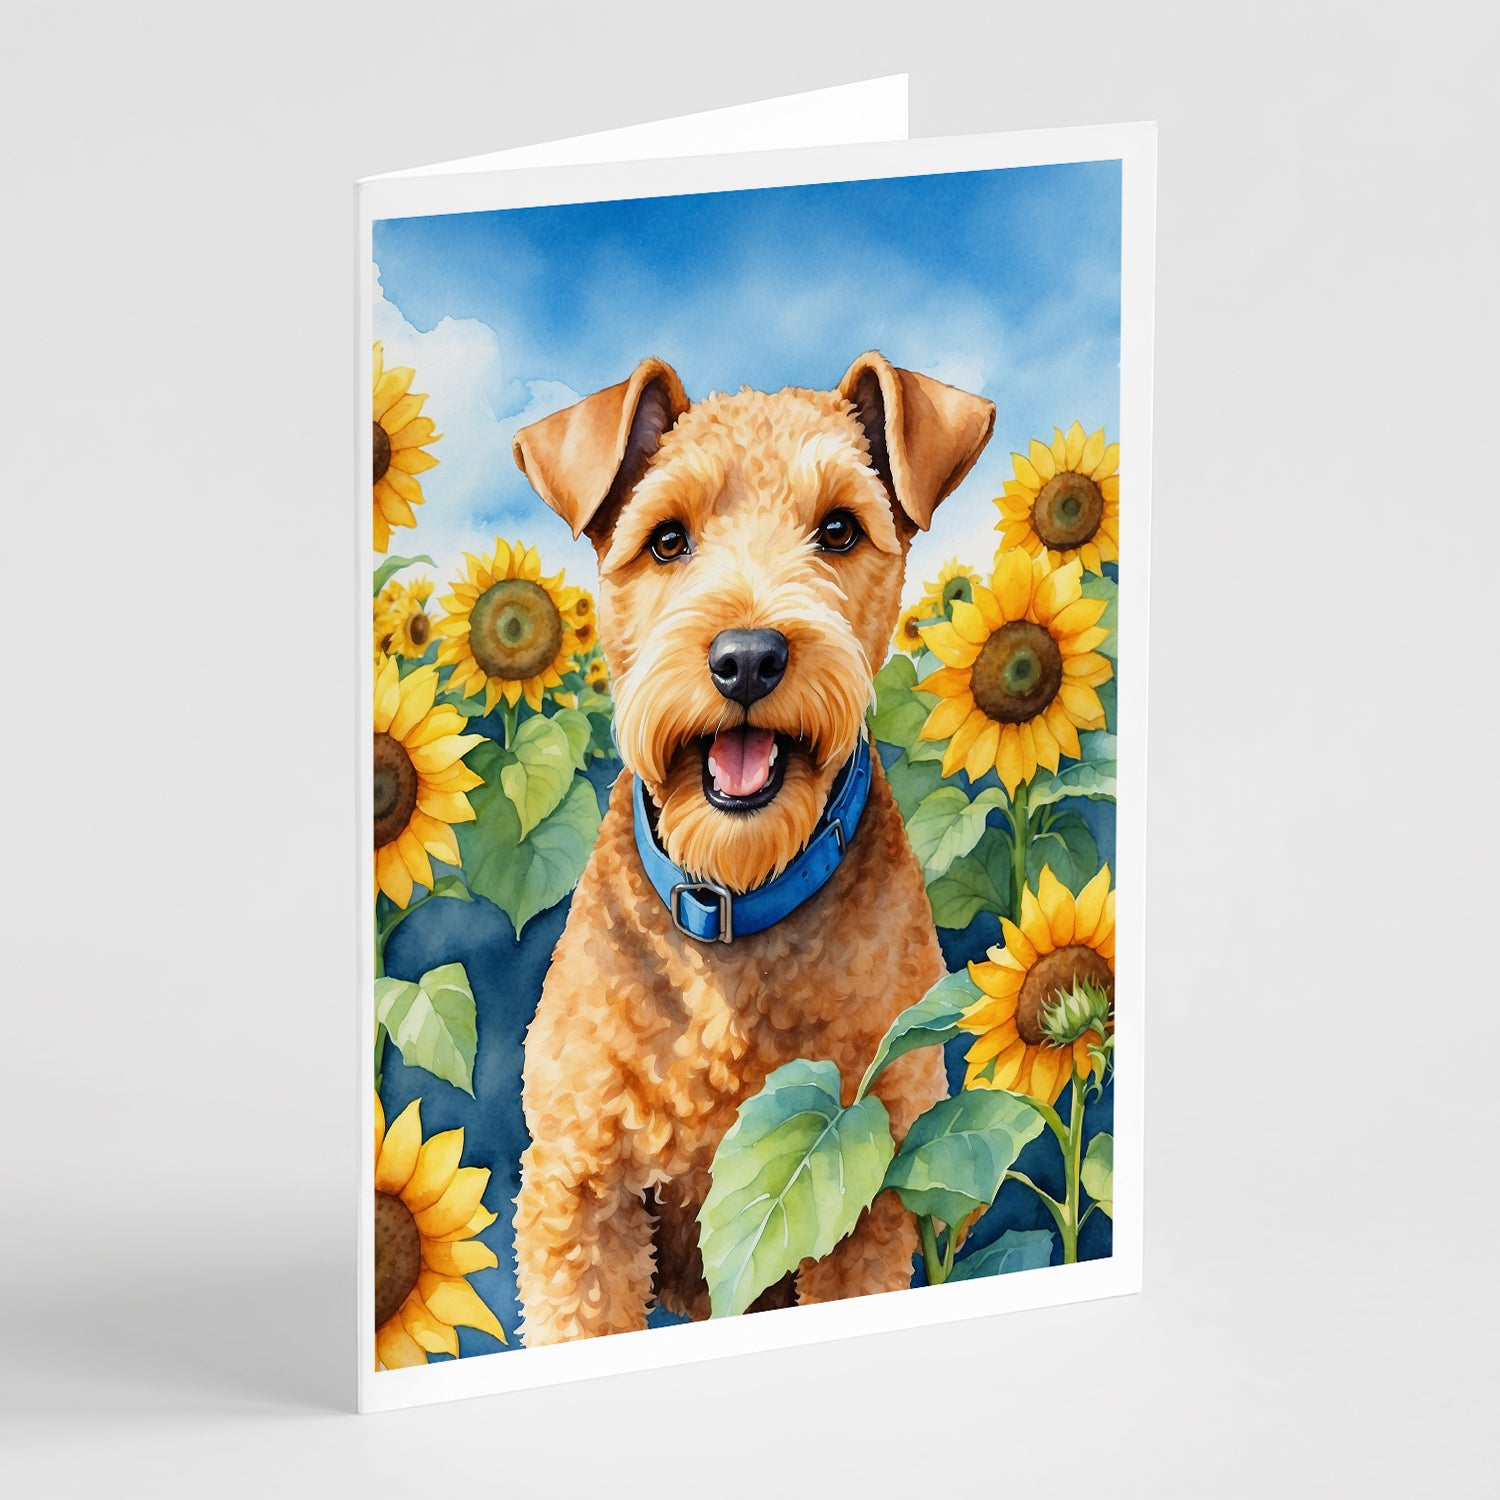 Buy this Lakeland Terrier in Sunflowers Greeting Cards Pack of 8